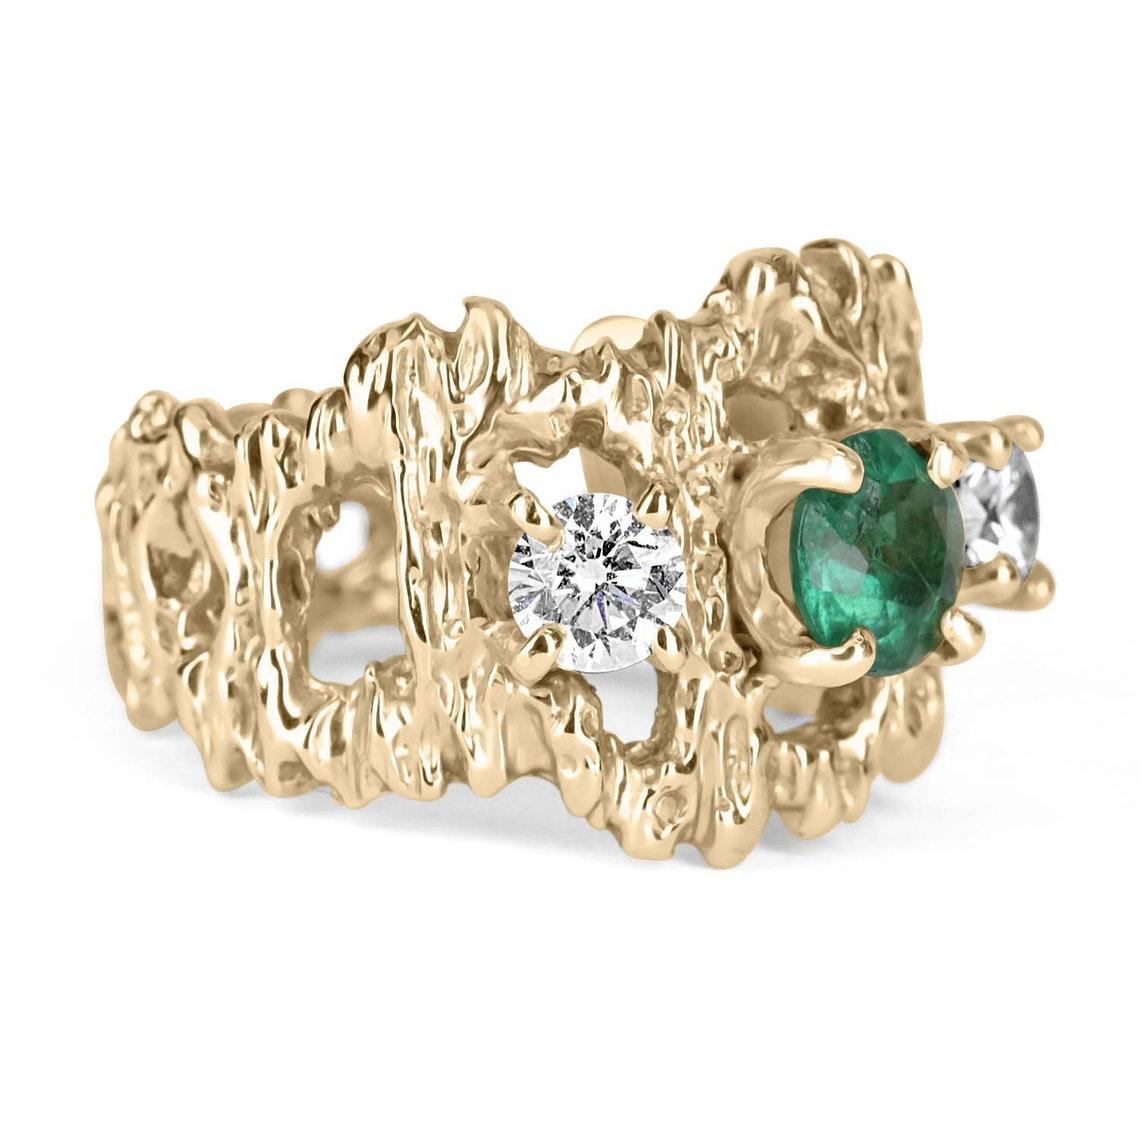 A vintage, unisex three-stone emerald and diamond ring. Crafted in 14K yellow gold, a round natural emerald is prong-set alongside natural diamonds in a nugget-style ring. The earth-mined gemstones are all clean to the eye and vivacious! The golden